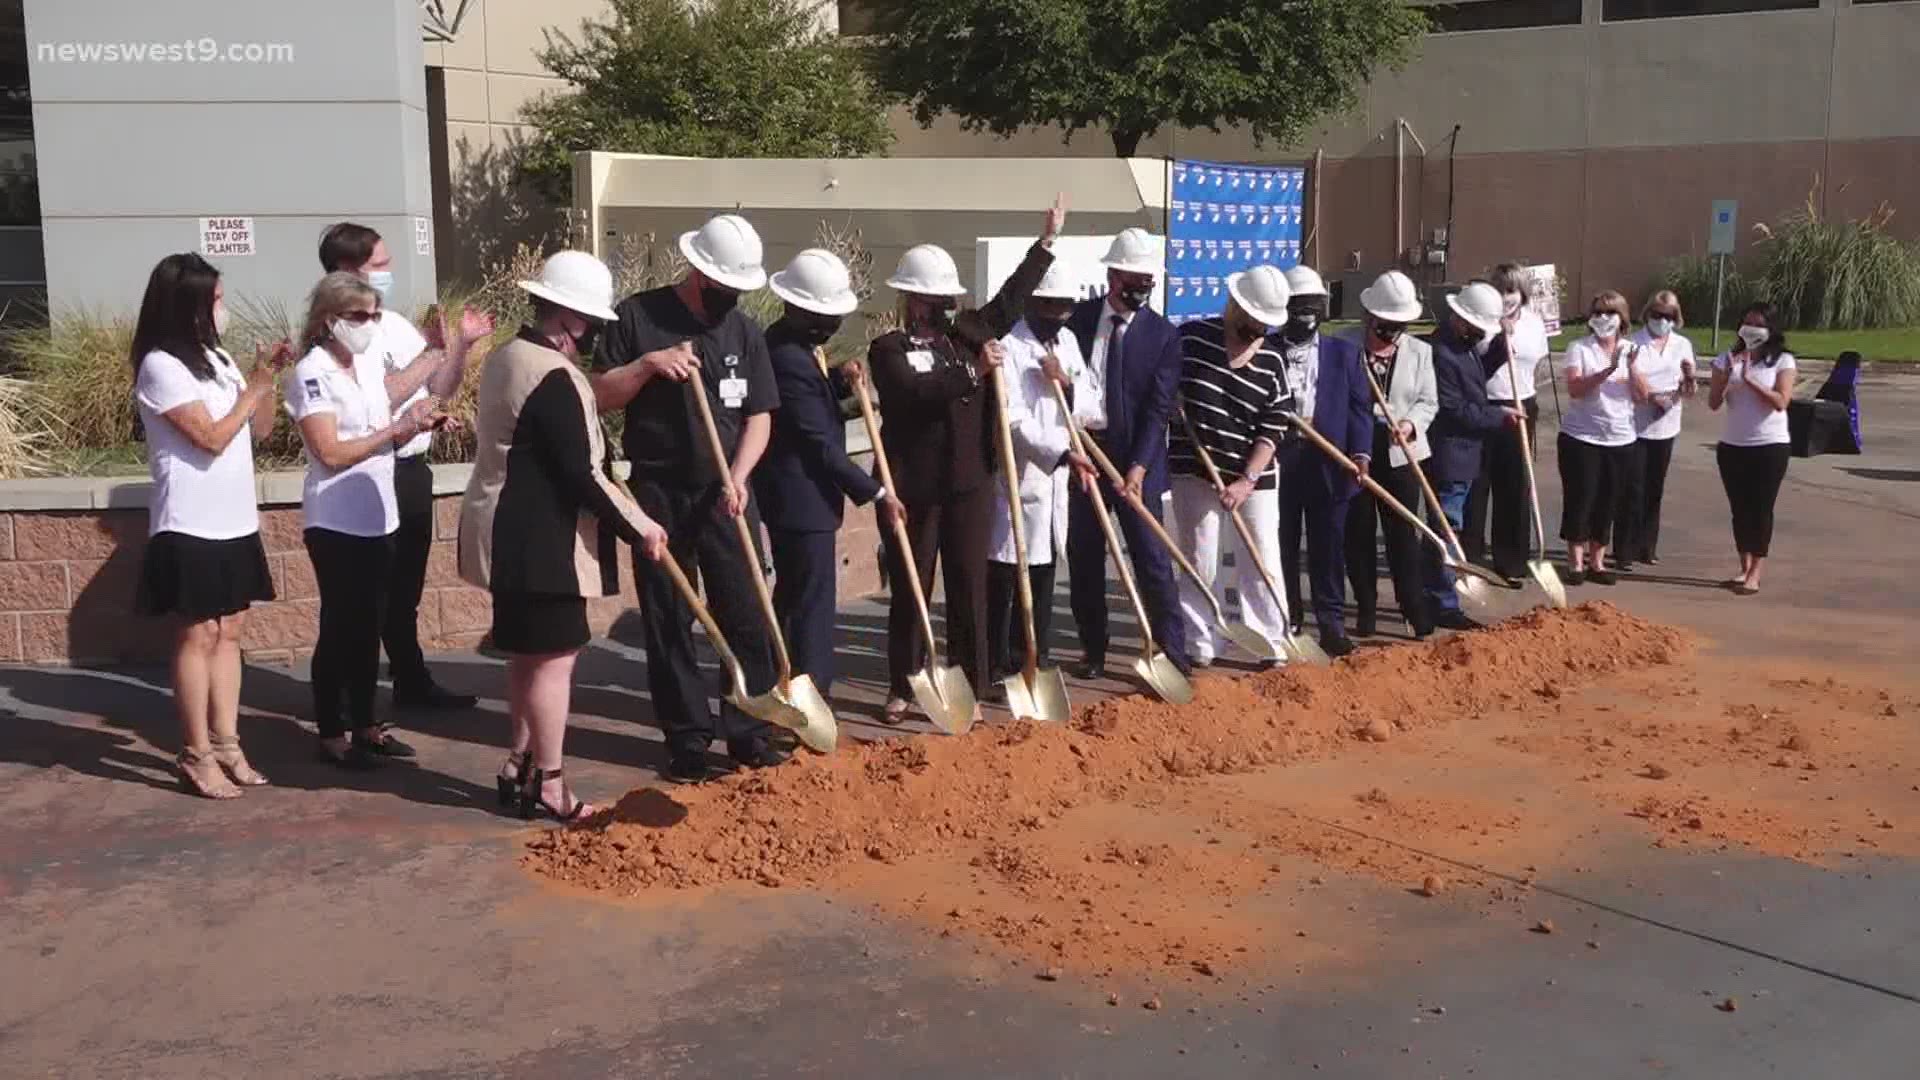 ORMC broke ground on their west campus renovations on Wednesday